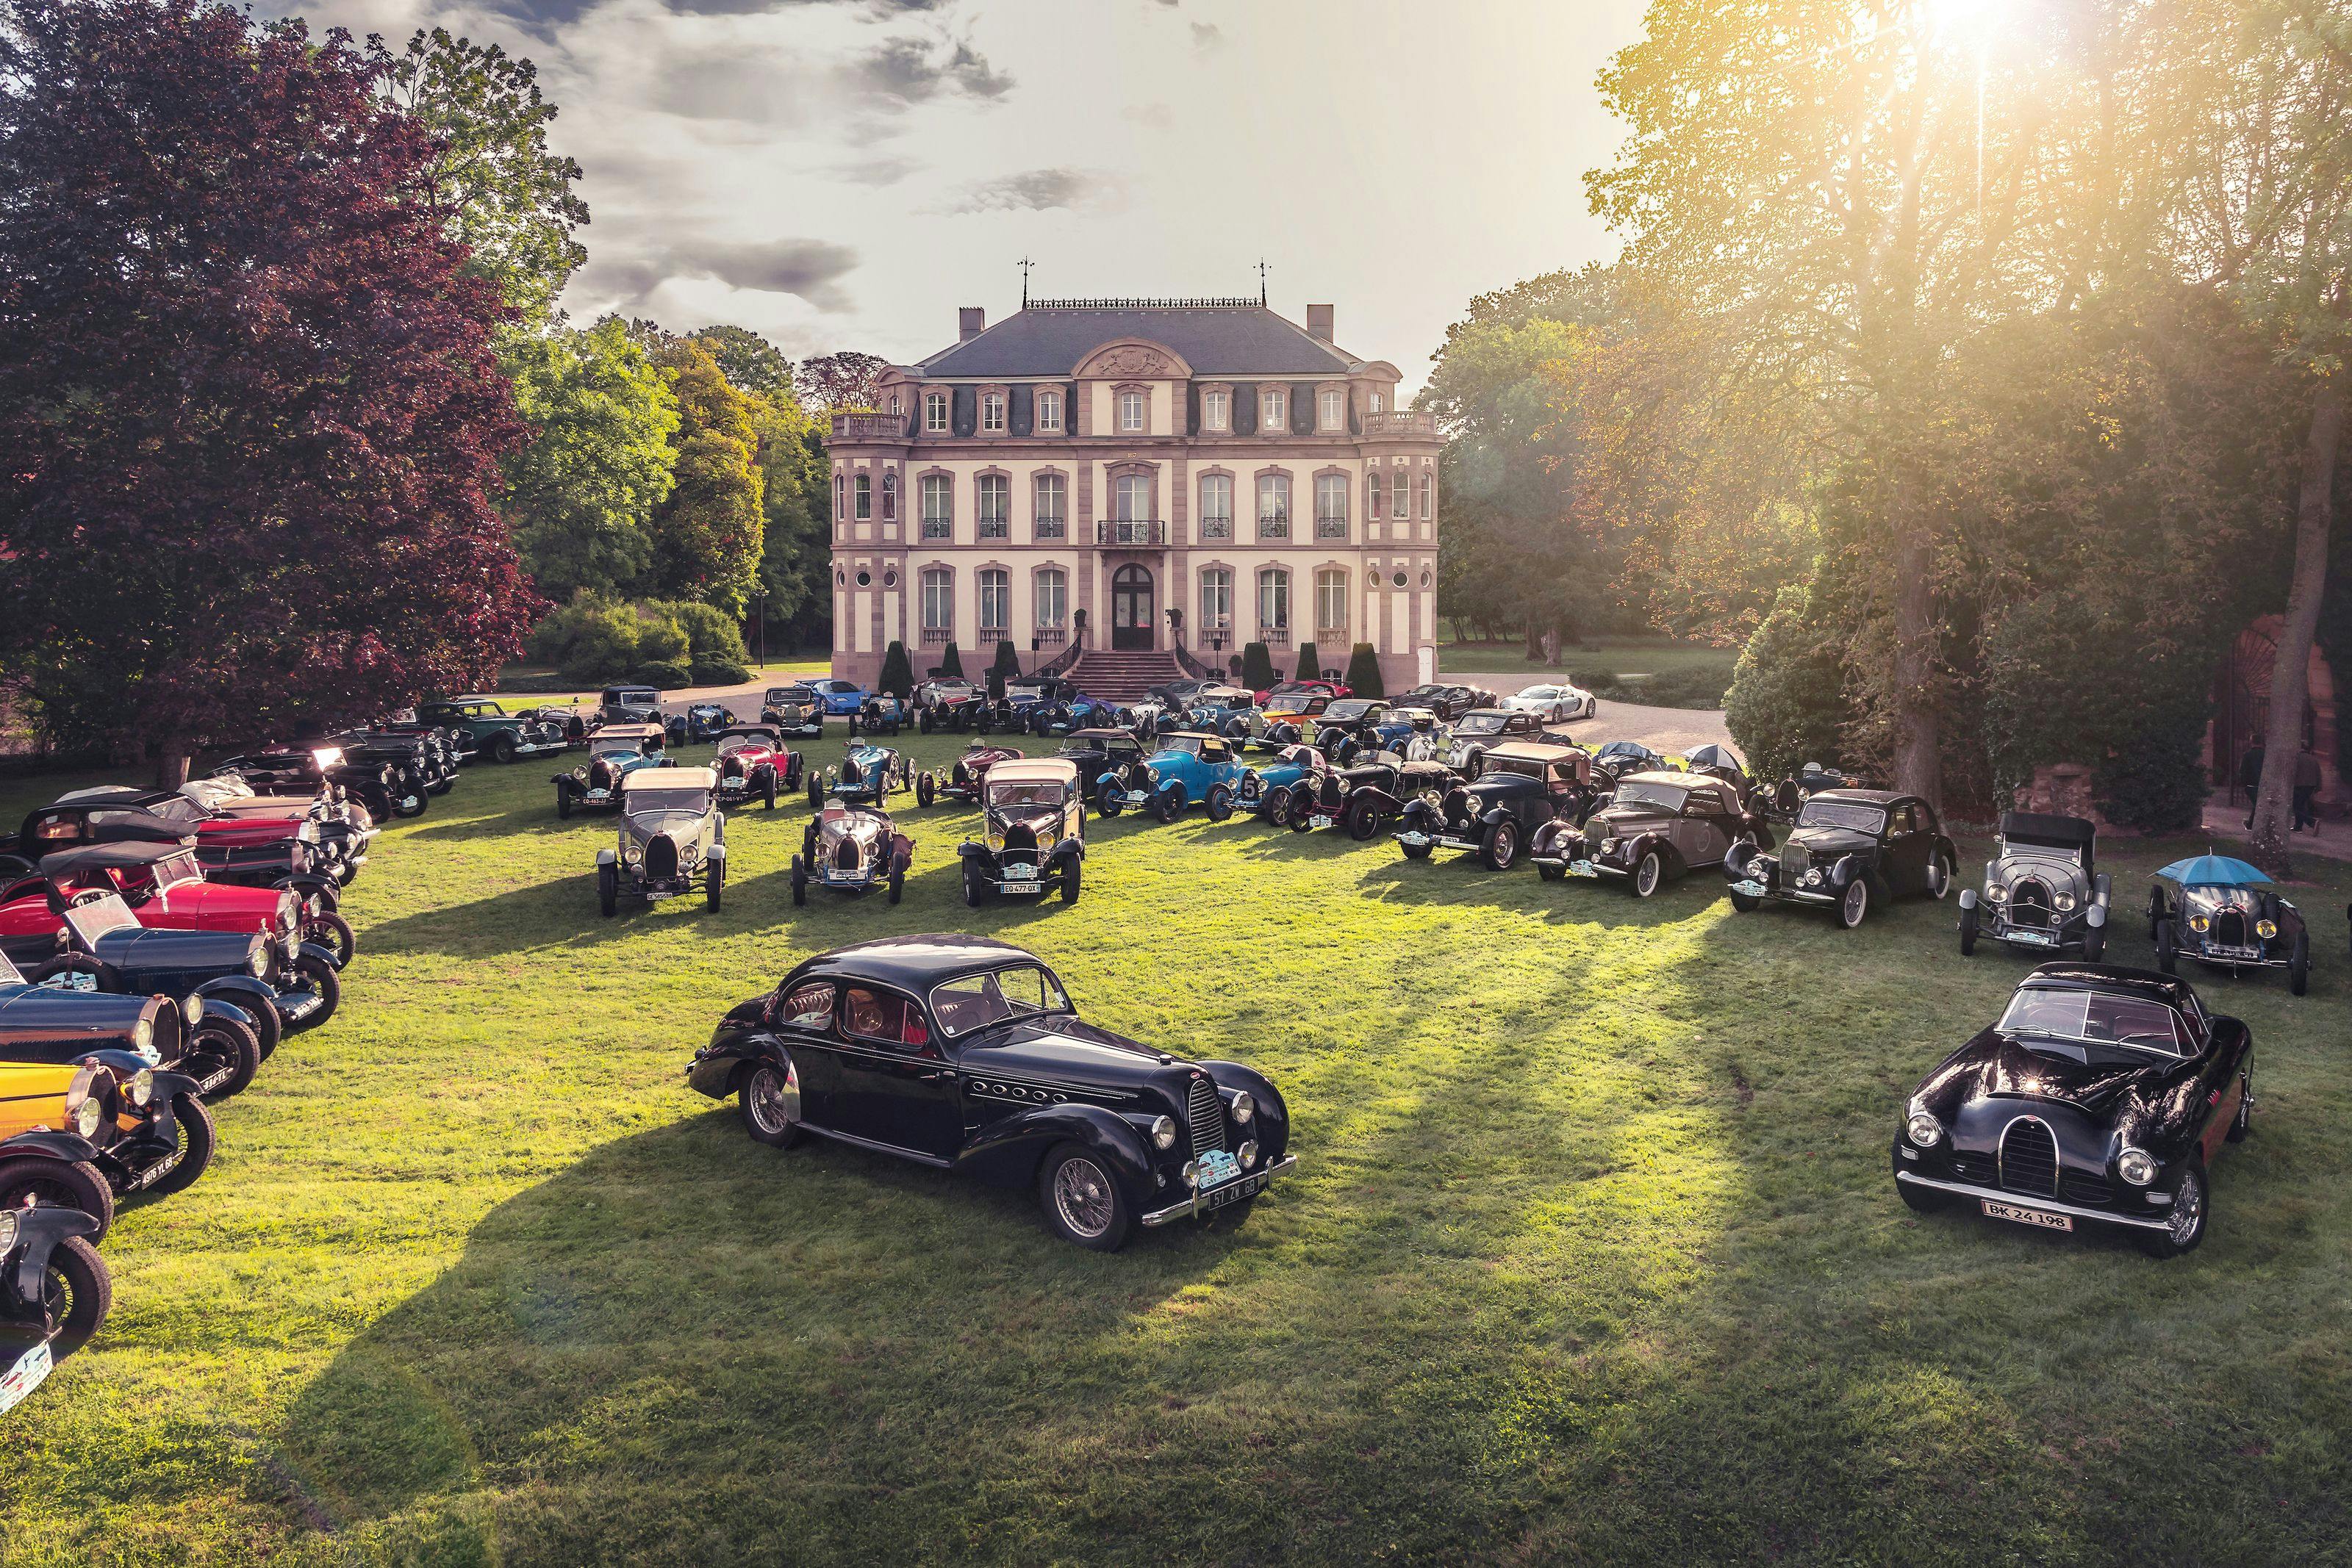 Bugatti festival: Honoring the birthplace of an iconic brand